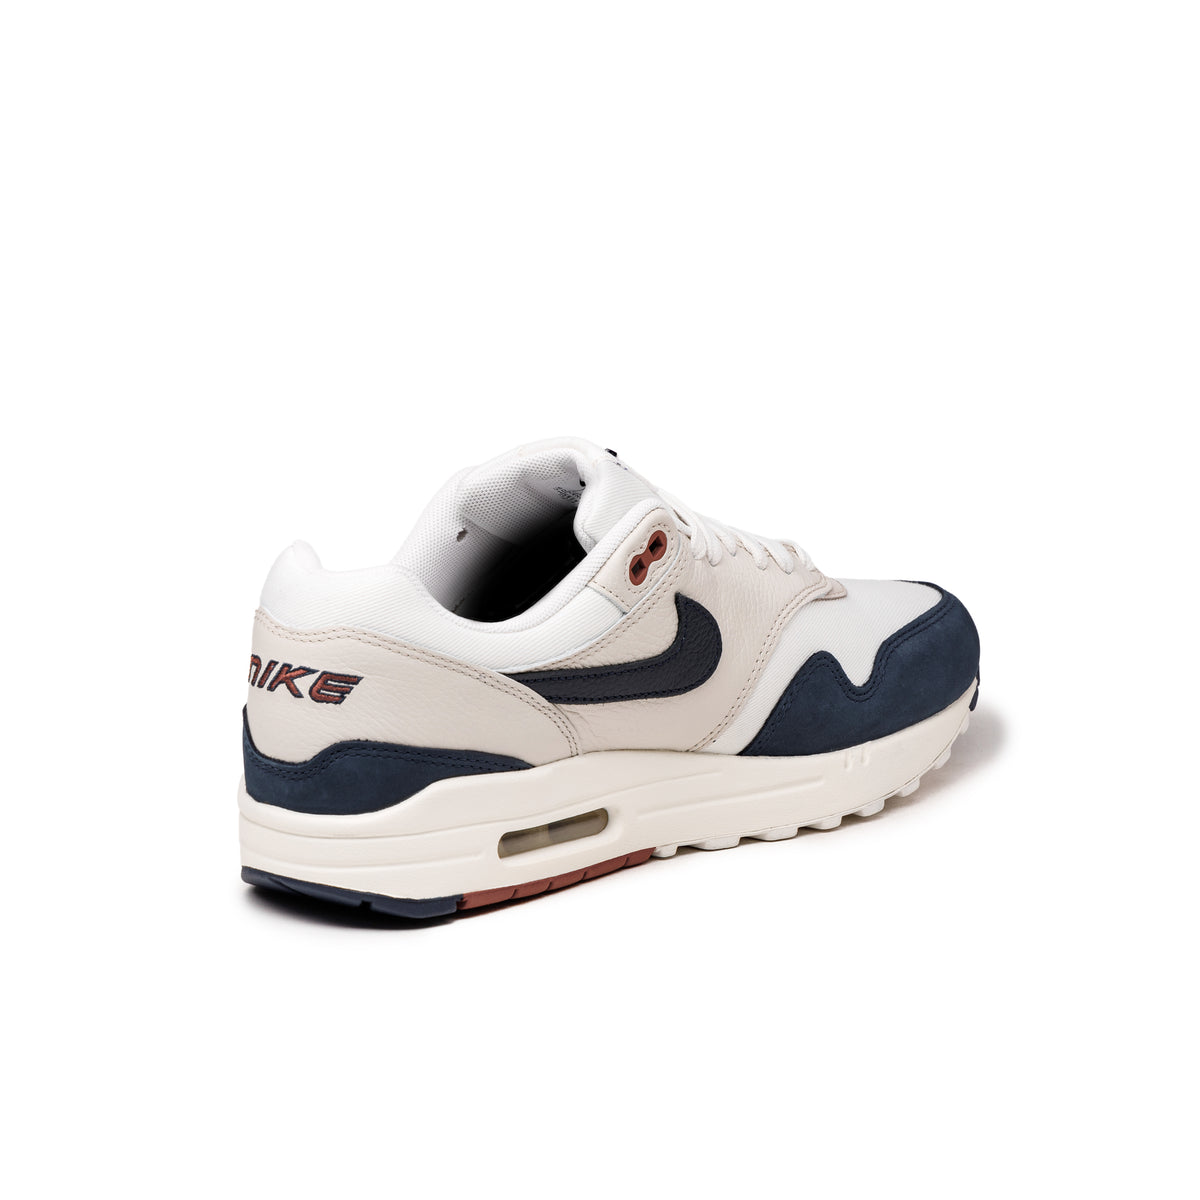 Nike Wmns Air Max 1 LX *Obsidian* – buy now at Asphaltgold Online